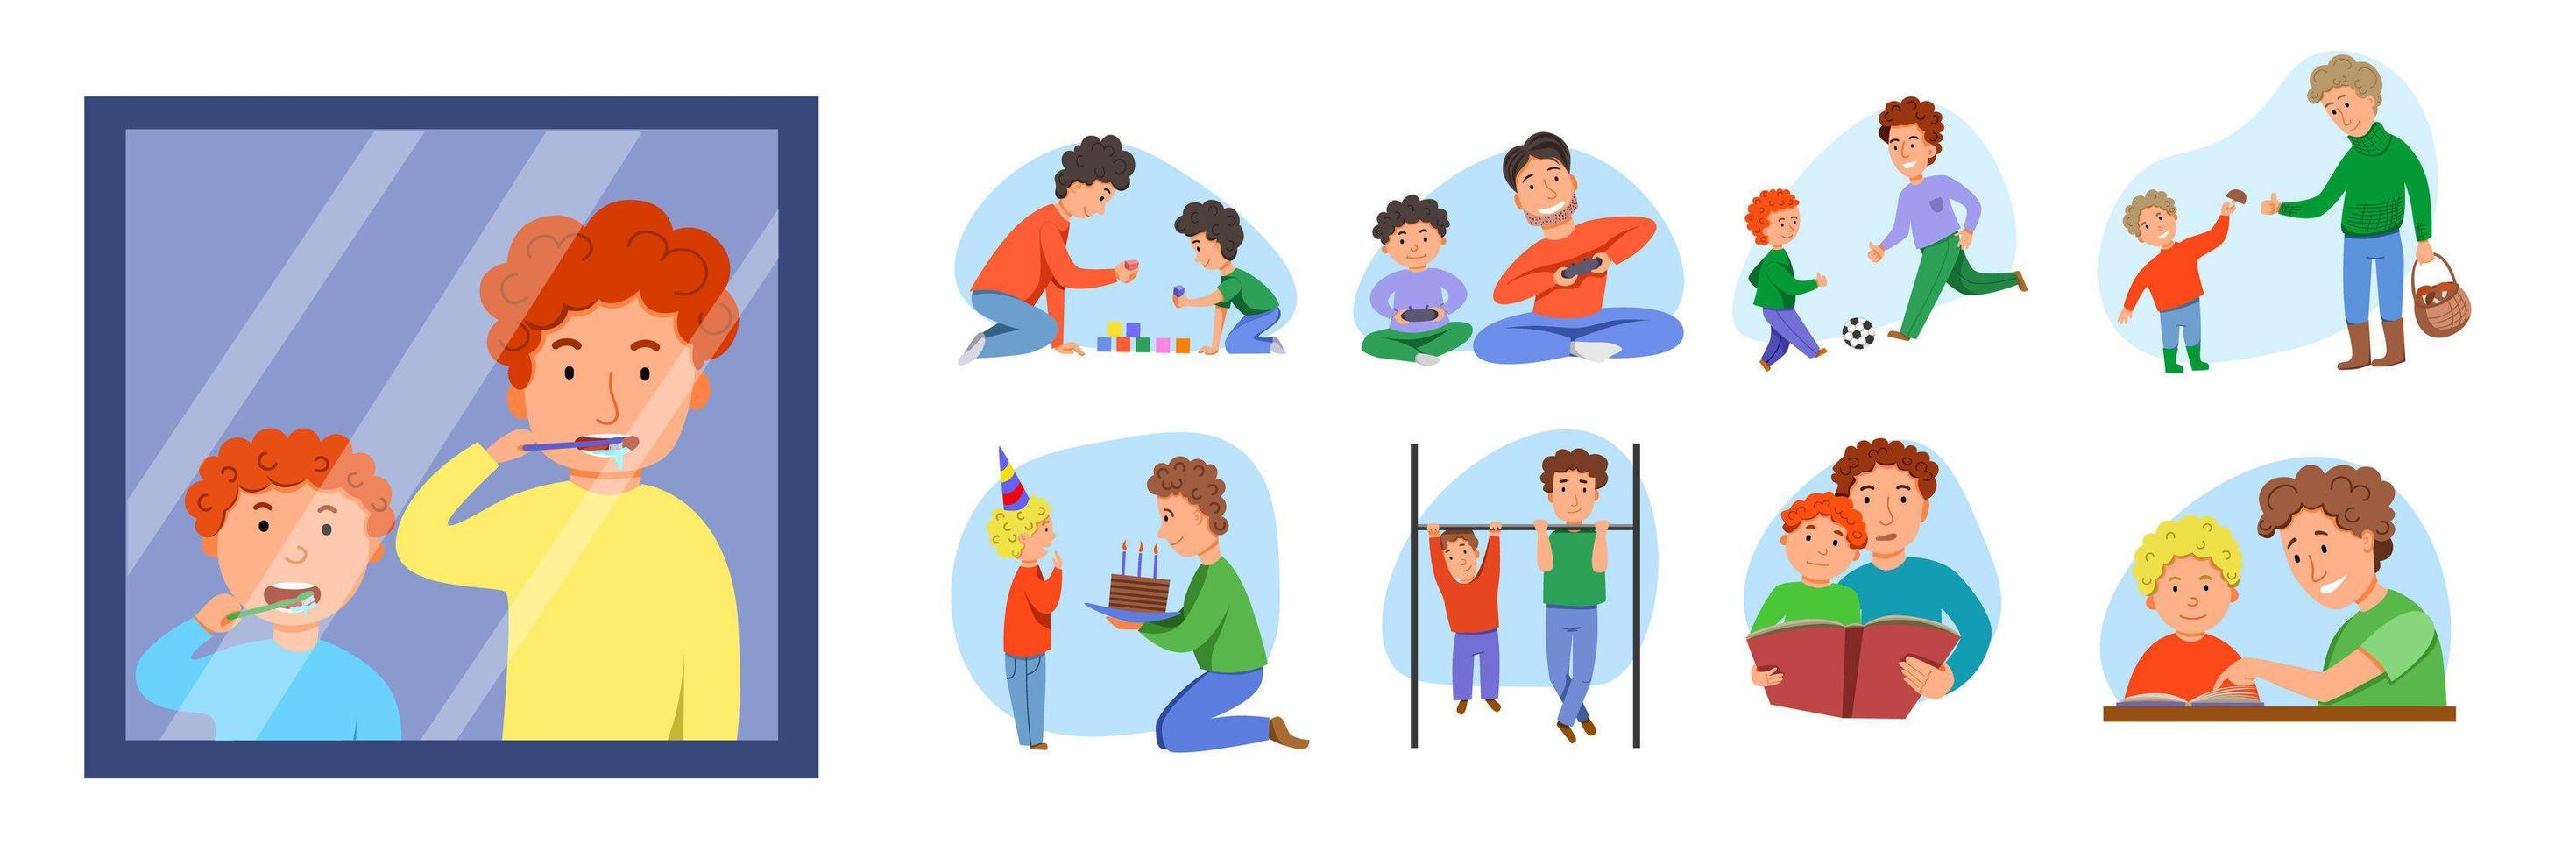 A set of entertainment activities for father and son. Birthday greetings, going to the forest for mushrooms, playing sports on a horizontal bar, brushing your teeth. vector